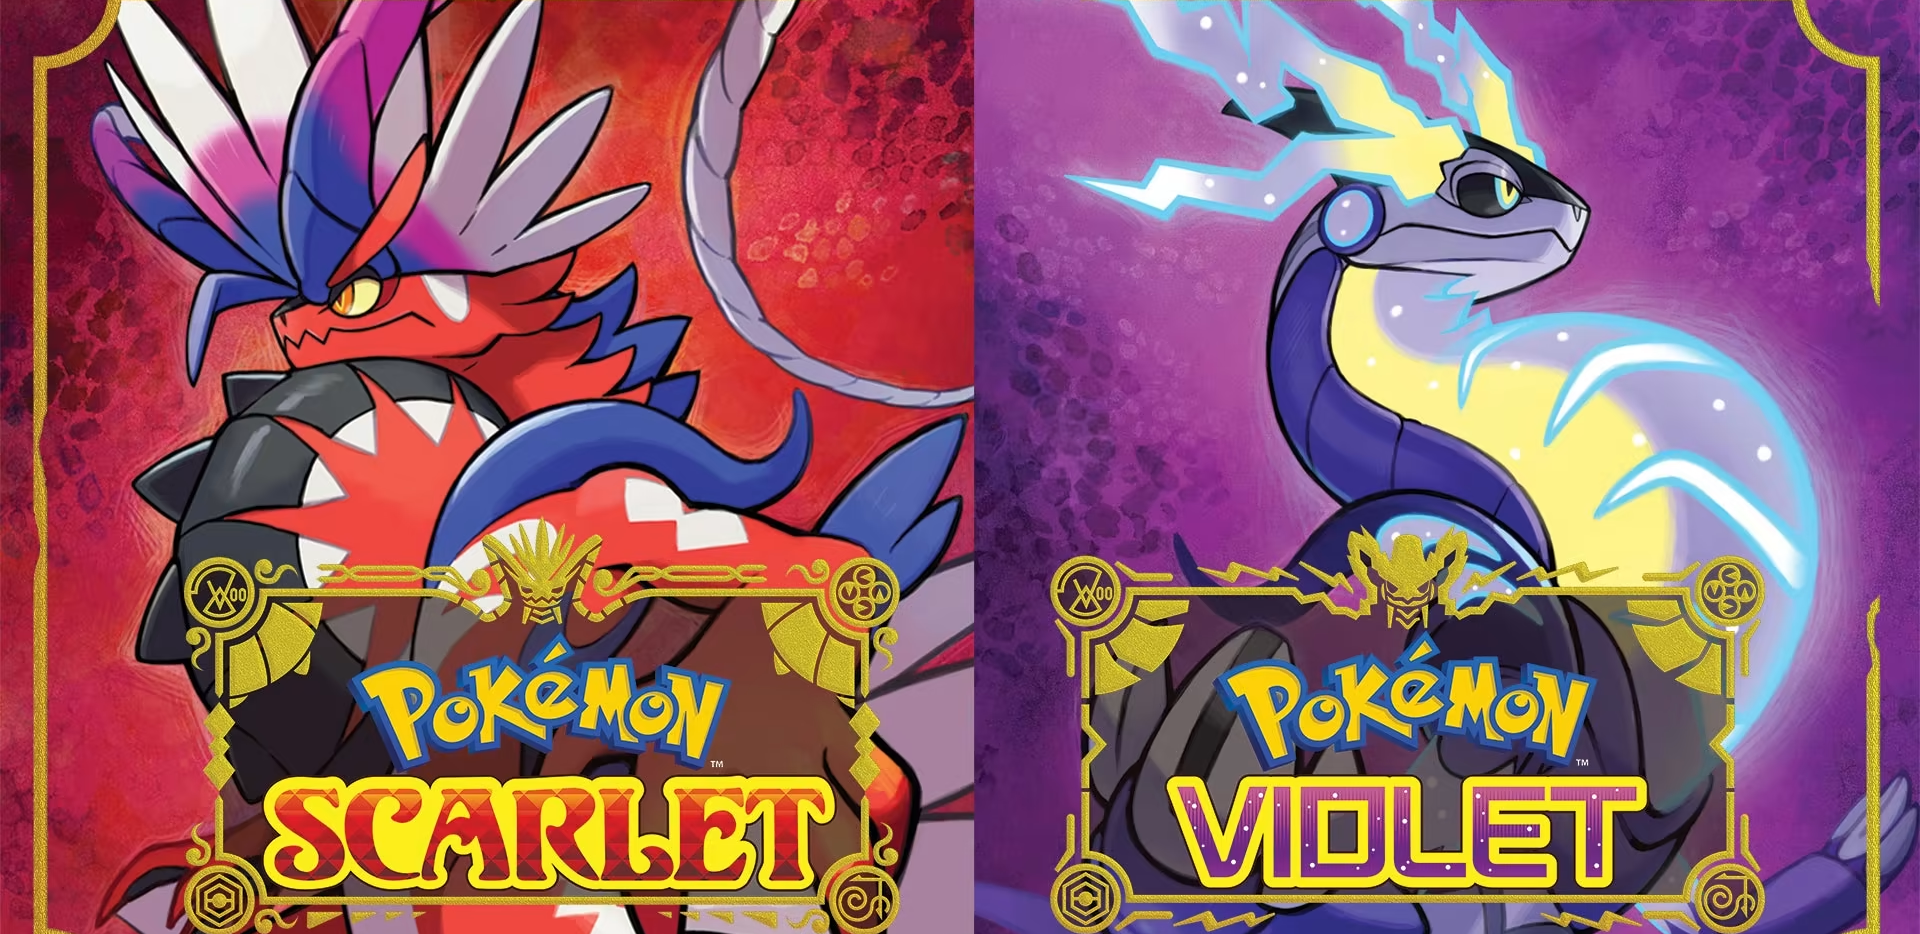 2000+ ELO Kingambit DUELS the HIGH LADDER in Pokemon Scarlet and Violet 